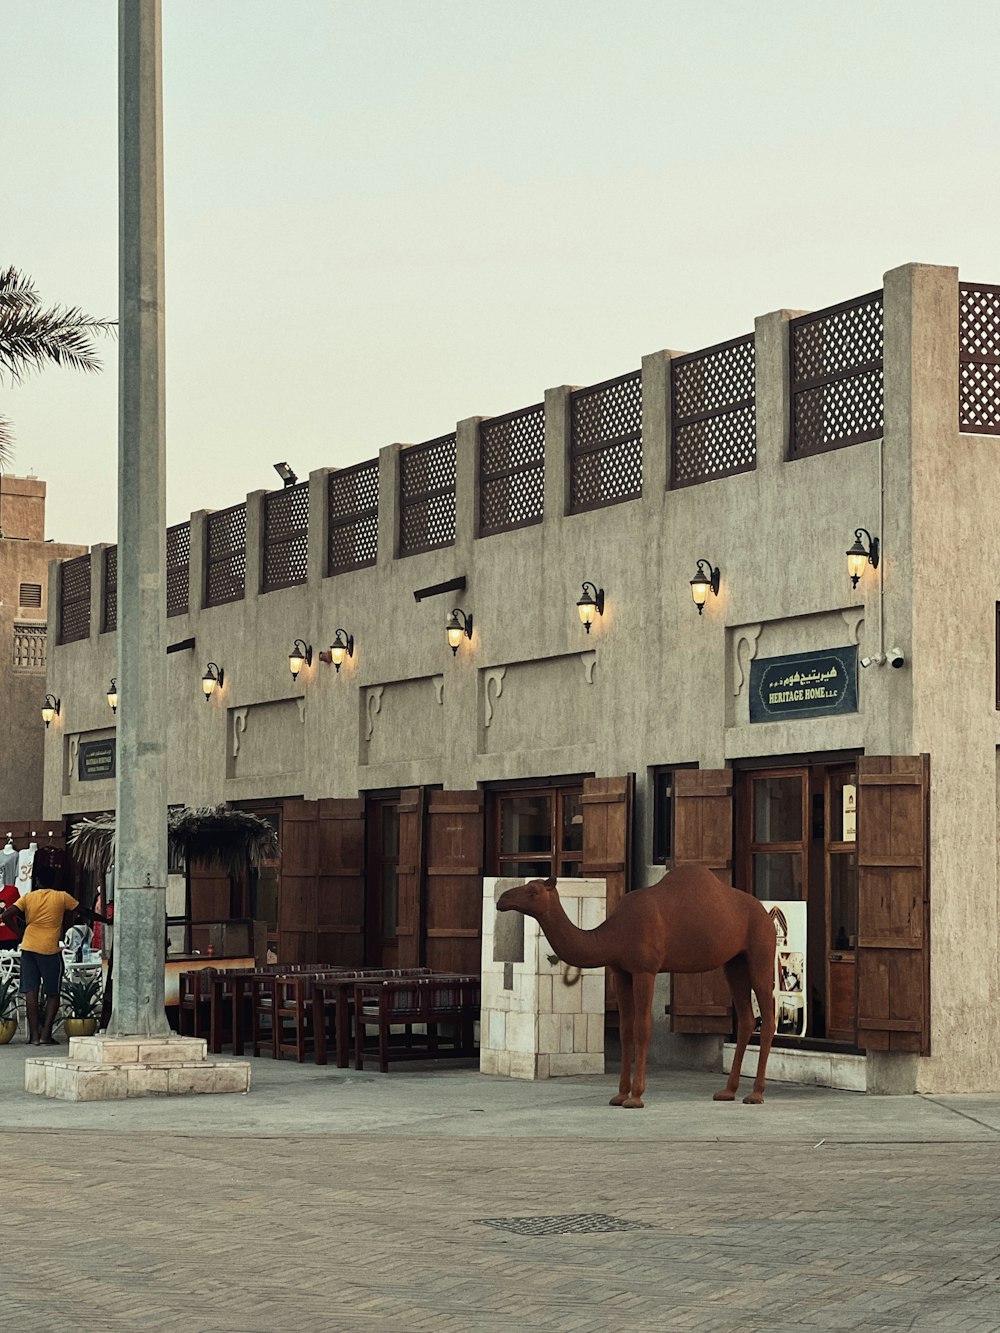 a camel statue in front of a building